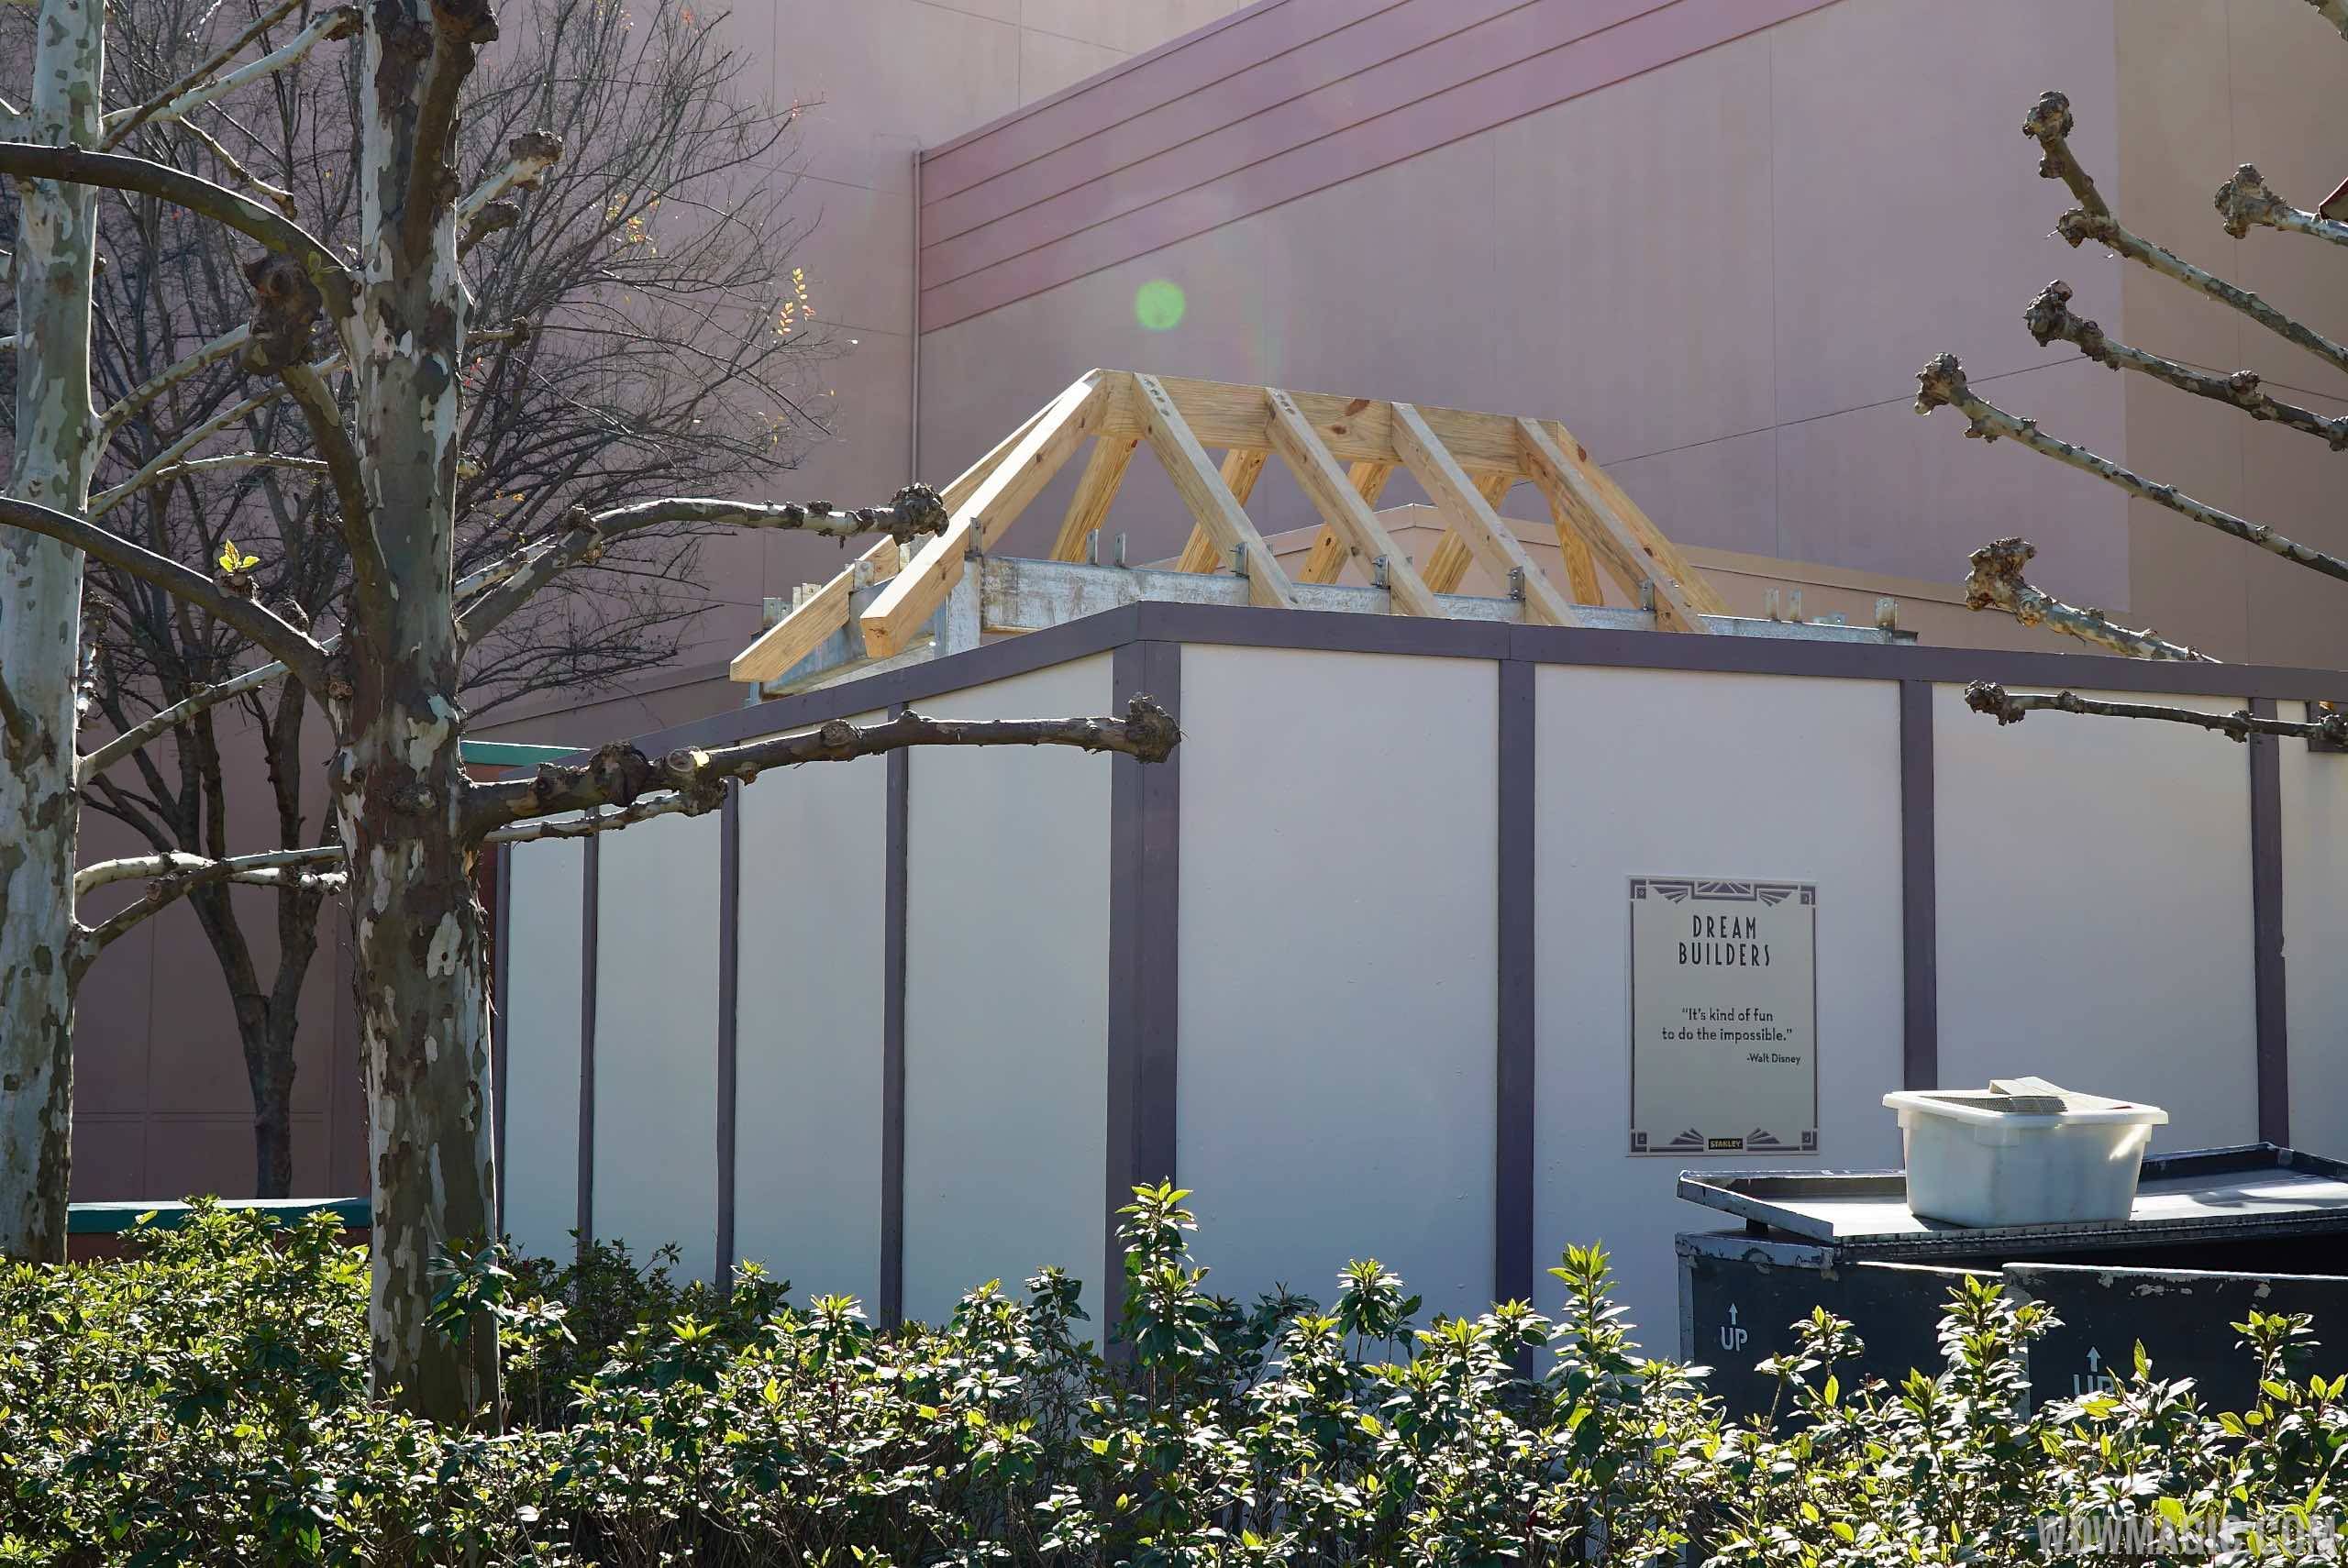 Construction at the exit of the Great Movie Ride